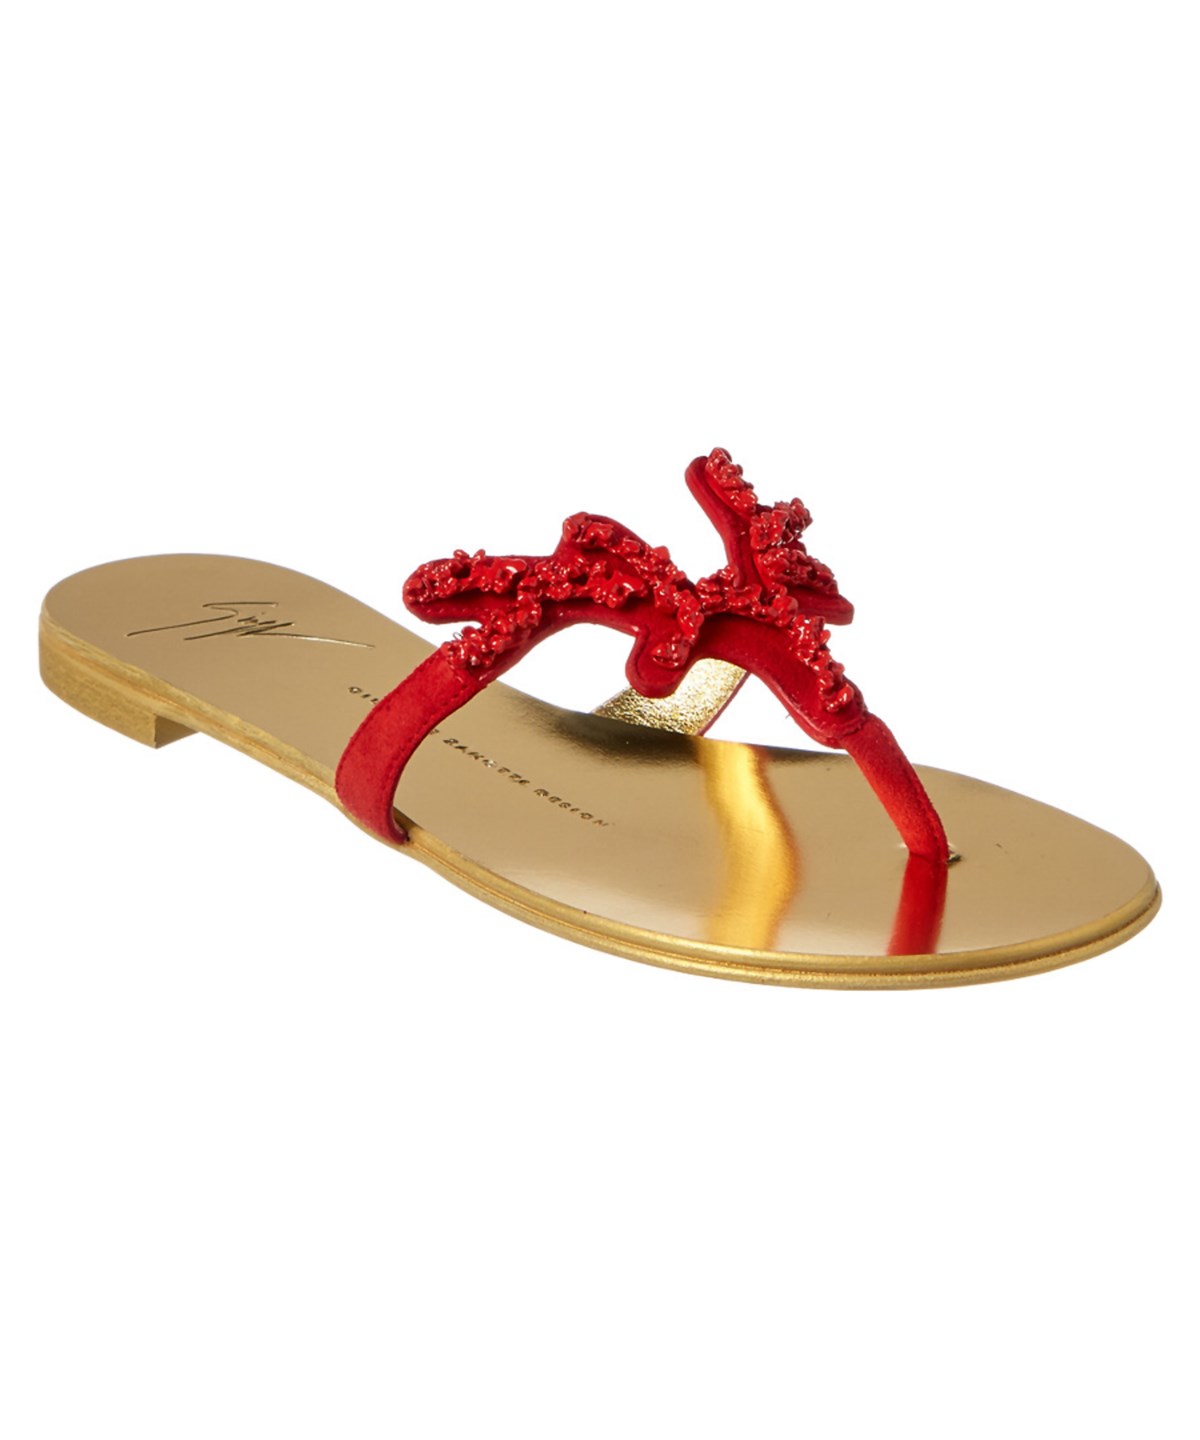 Giuseppe Zanotti Coral Suede Flat Sandal' In Red | ModeSens